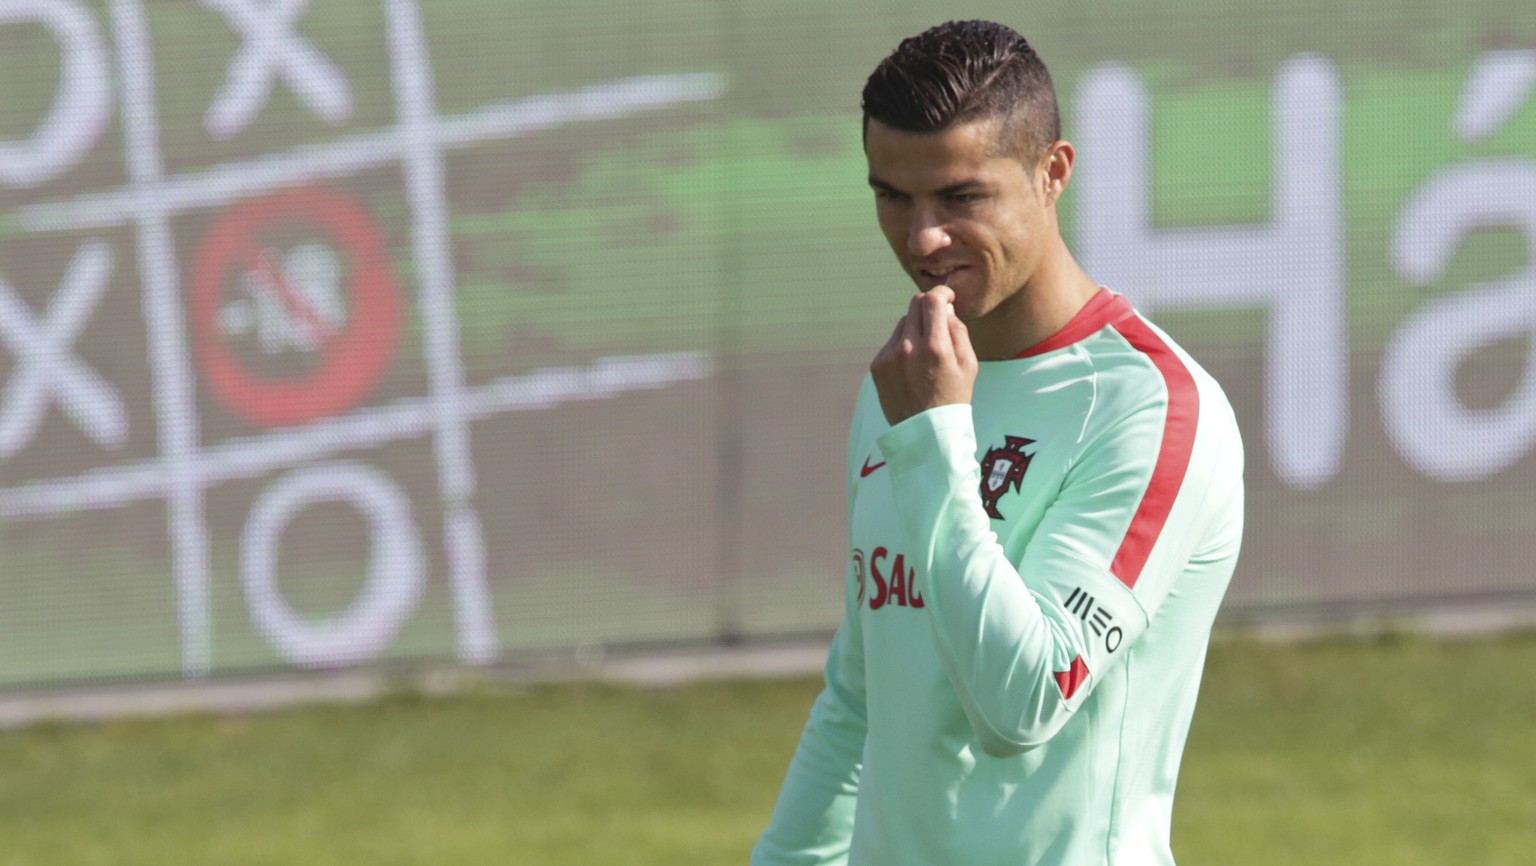 Portugal&#039;s Cristiano Ronaldo looks on during a training session in Oeiras, outside Lisbon, Monday, Oct. 9, 2017. Portugal will face Switzerland in a World Cup Group B qualifying soccer match in L ...